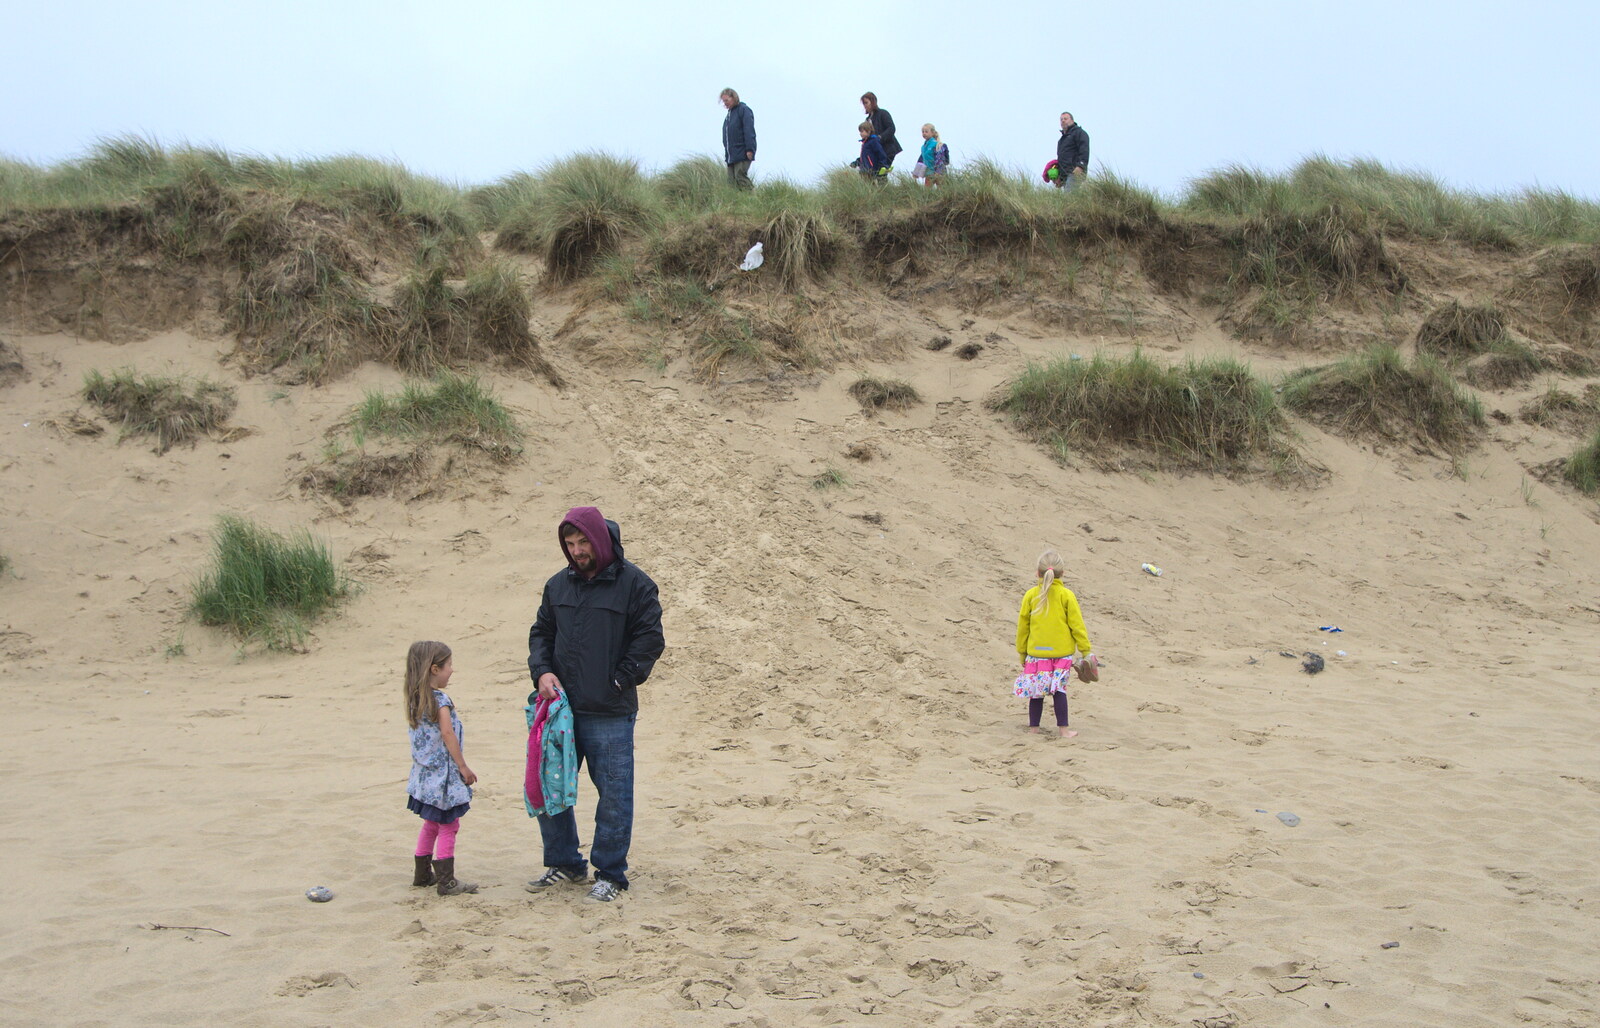 The rest of the gang join up from A Wet Weekend of Camping, Waxham Sands, Norfolk - 13th June 2015